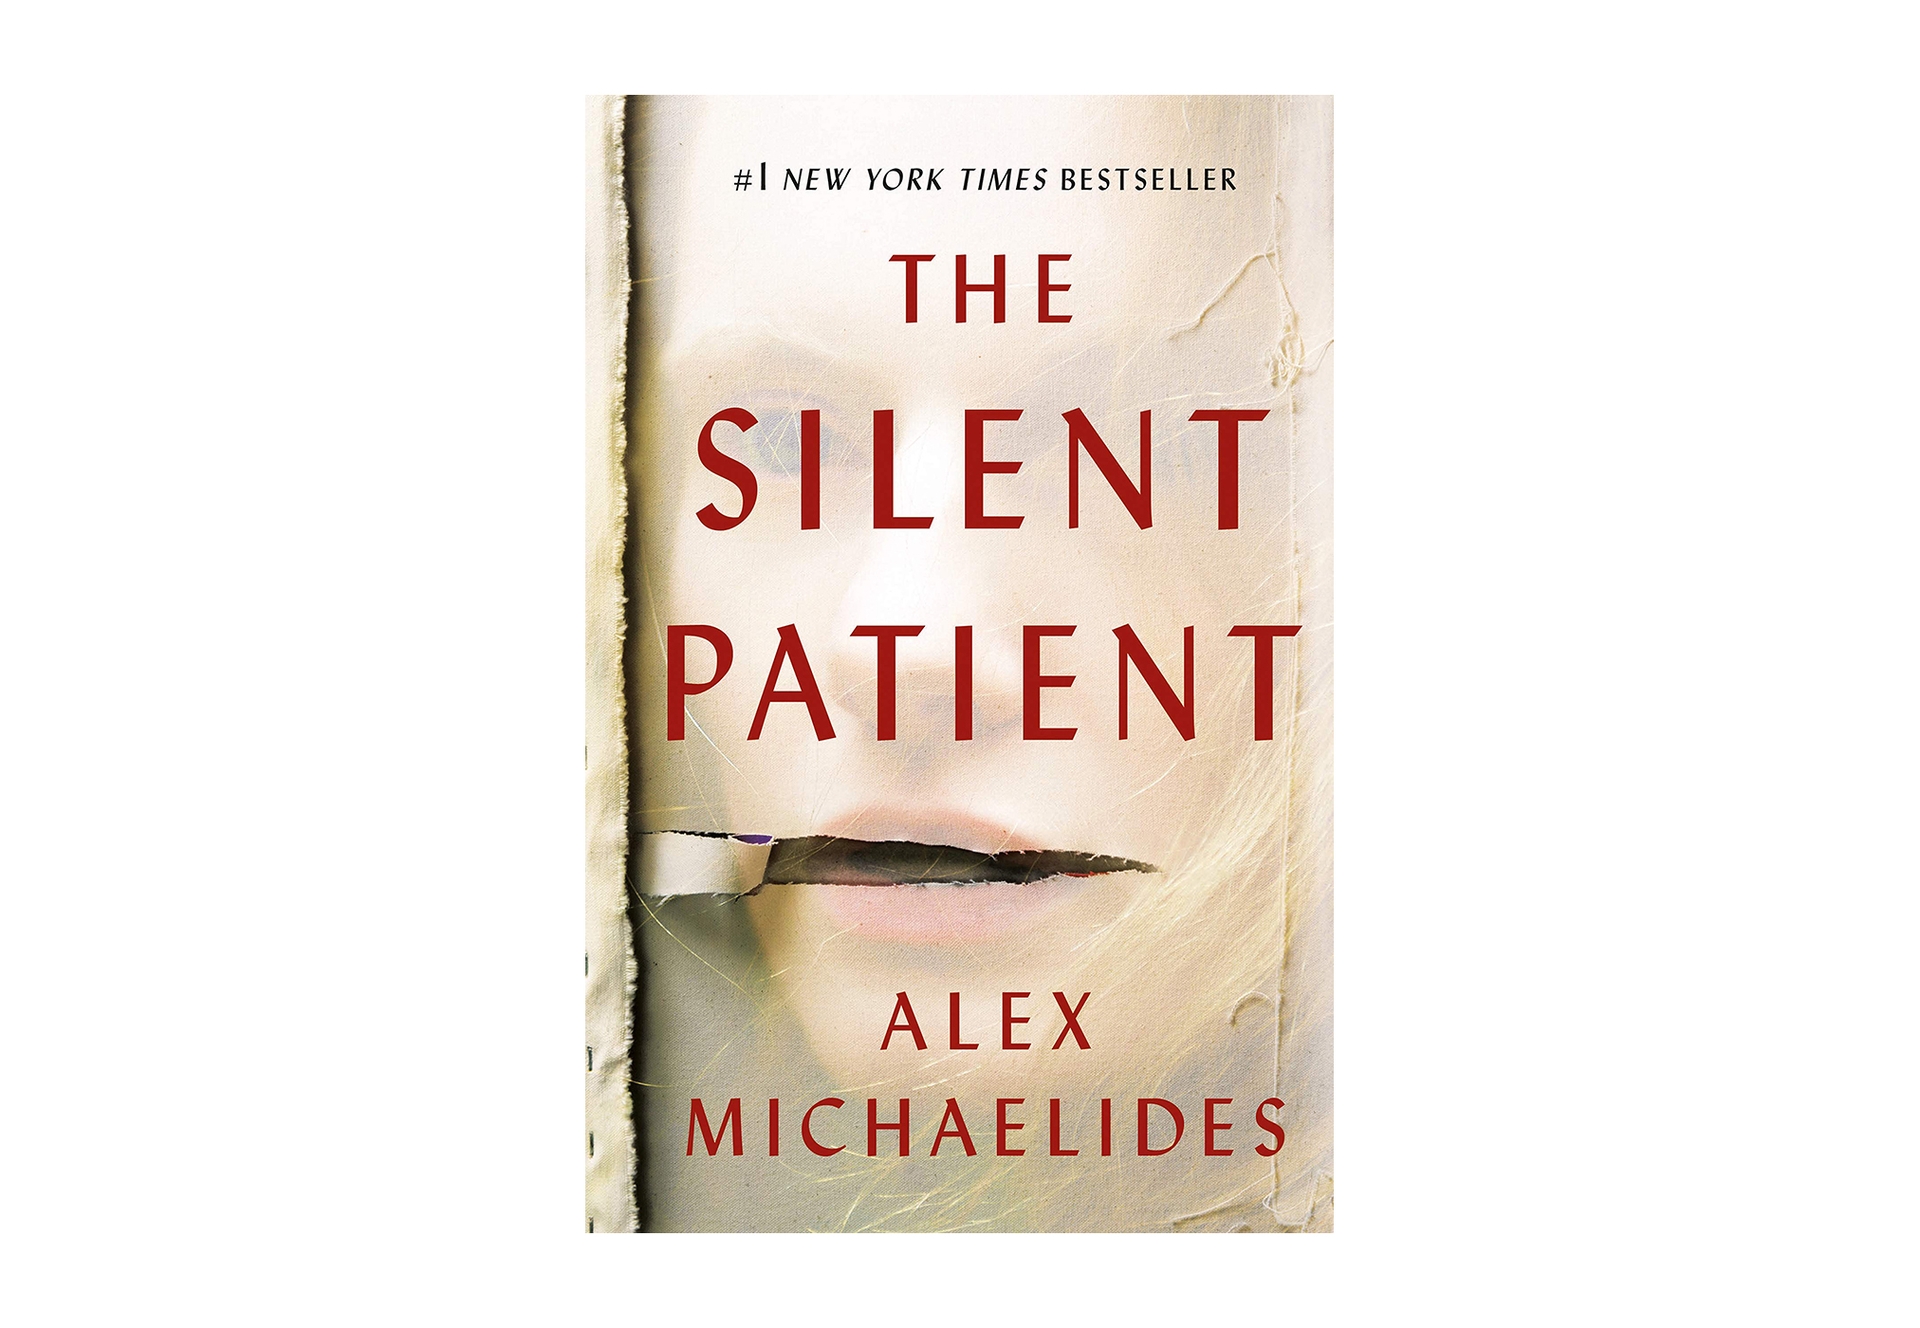 Book cover for "The Silent Patient" by Alex Michaelides, a woman's face appears to show from under a gauzy material, with a tear near the mouth. The Title and authors' name are in sans-serif red font in all caps.